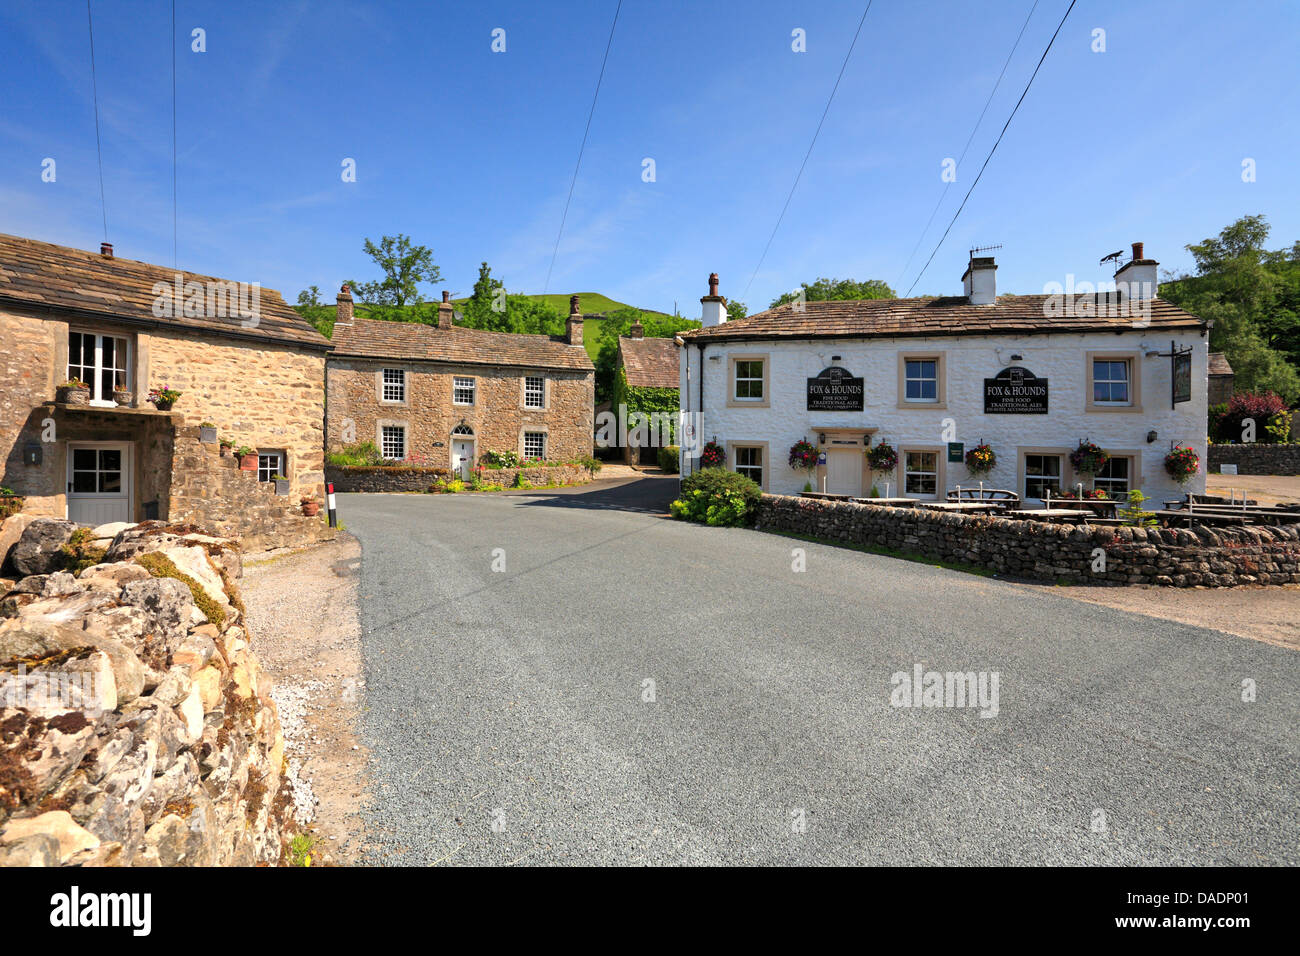 The Fox and Hounds pub in Starbotton, Wharfedale, North Yorkshire, Yorkshire Dales National Park, England, UK. Stock Photo